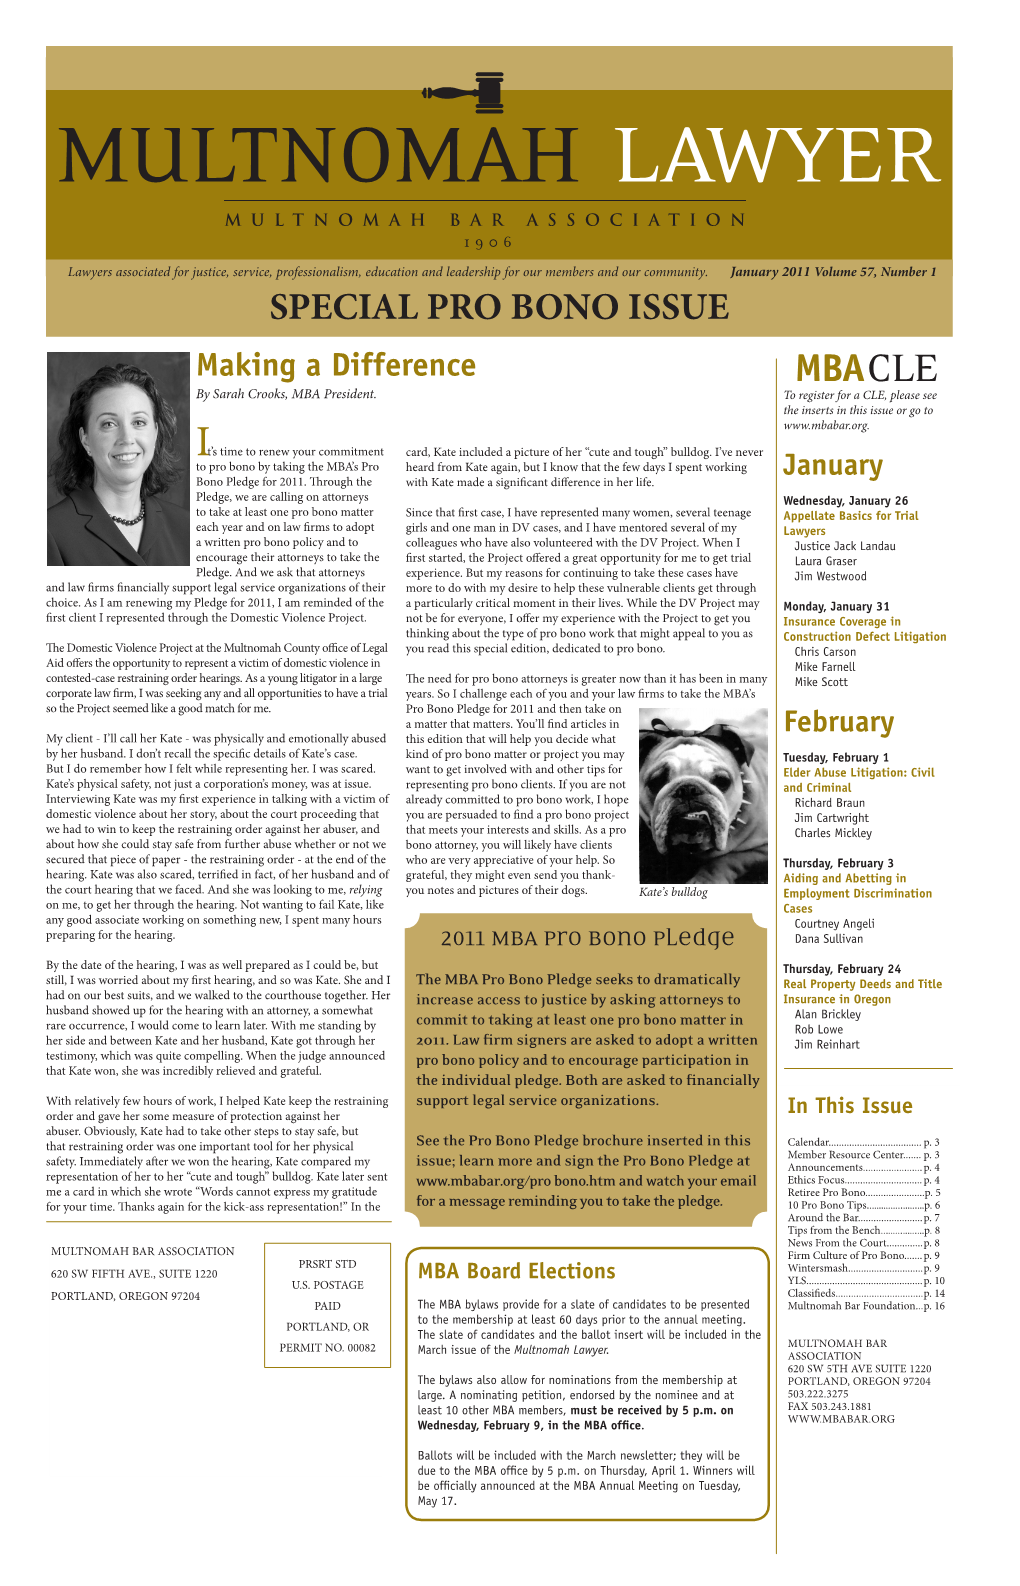 SPECIAL PRO BONO ISSUE Making a Difference MBACLE by Sarah Crooks, MBA President